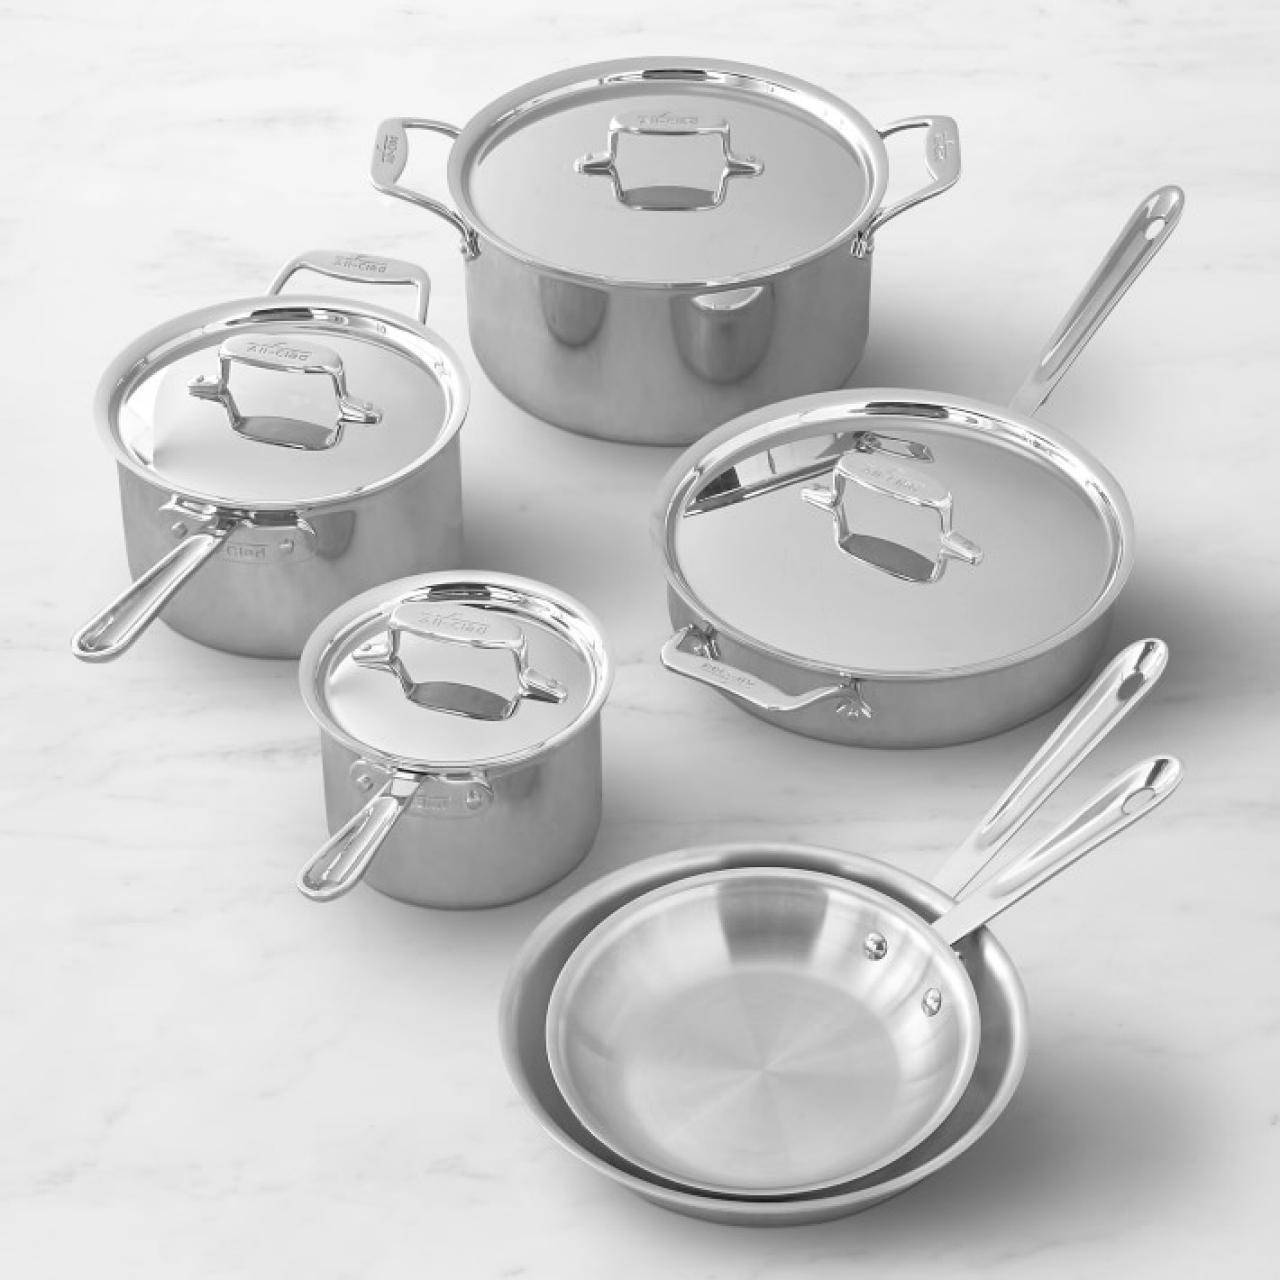 https://food.fnr.sndimg.com/content/dam/images/food/products/2022/4/20/rx_all-clad-d5-stainless-steel-10-piece-cookware-set.jpeg.rend.hgtvcom.1280.1280.suffix/1650456192350.jpeg